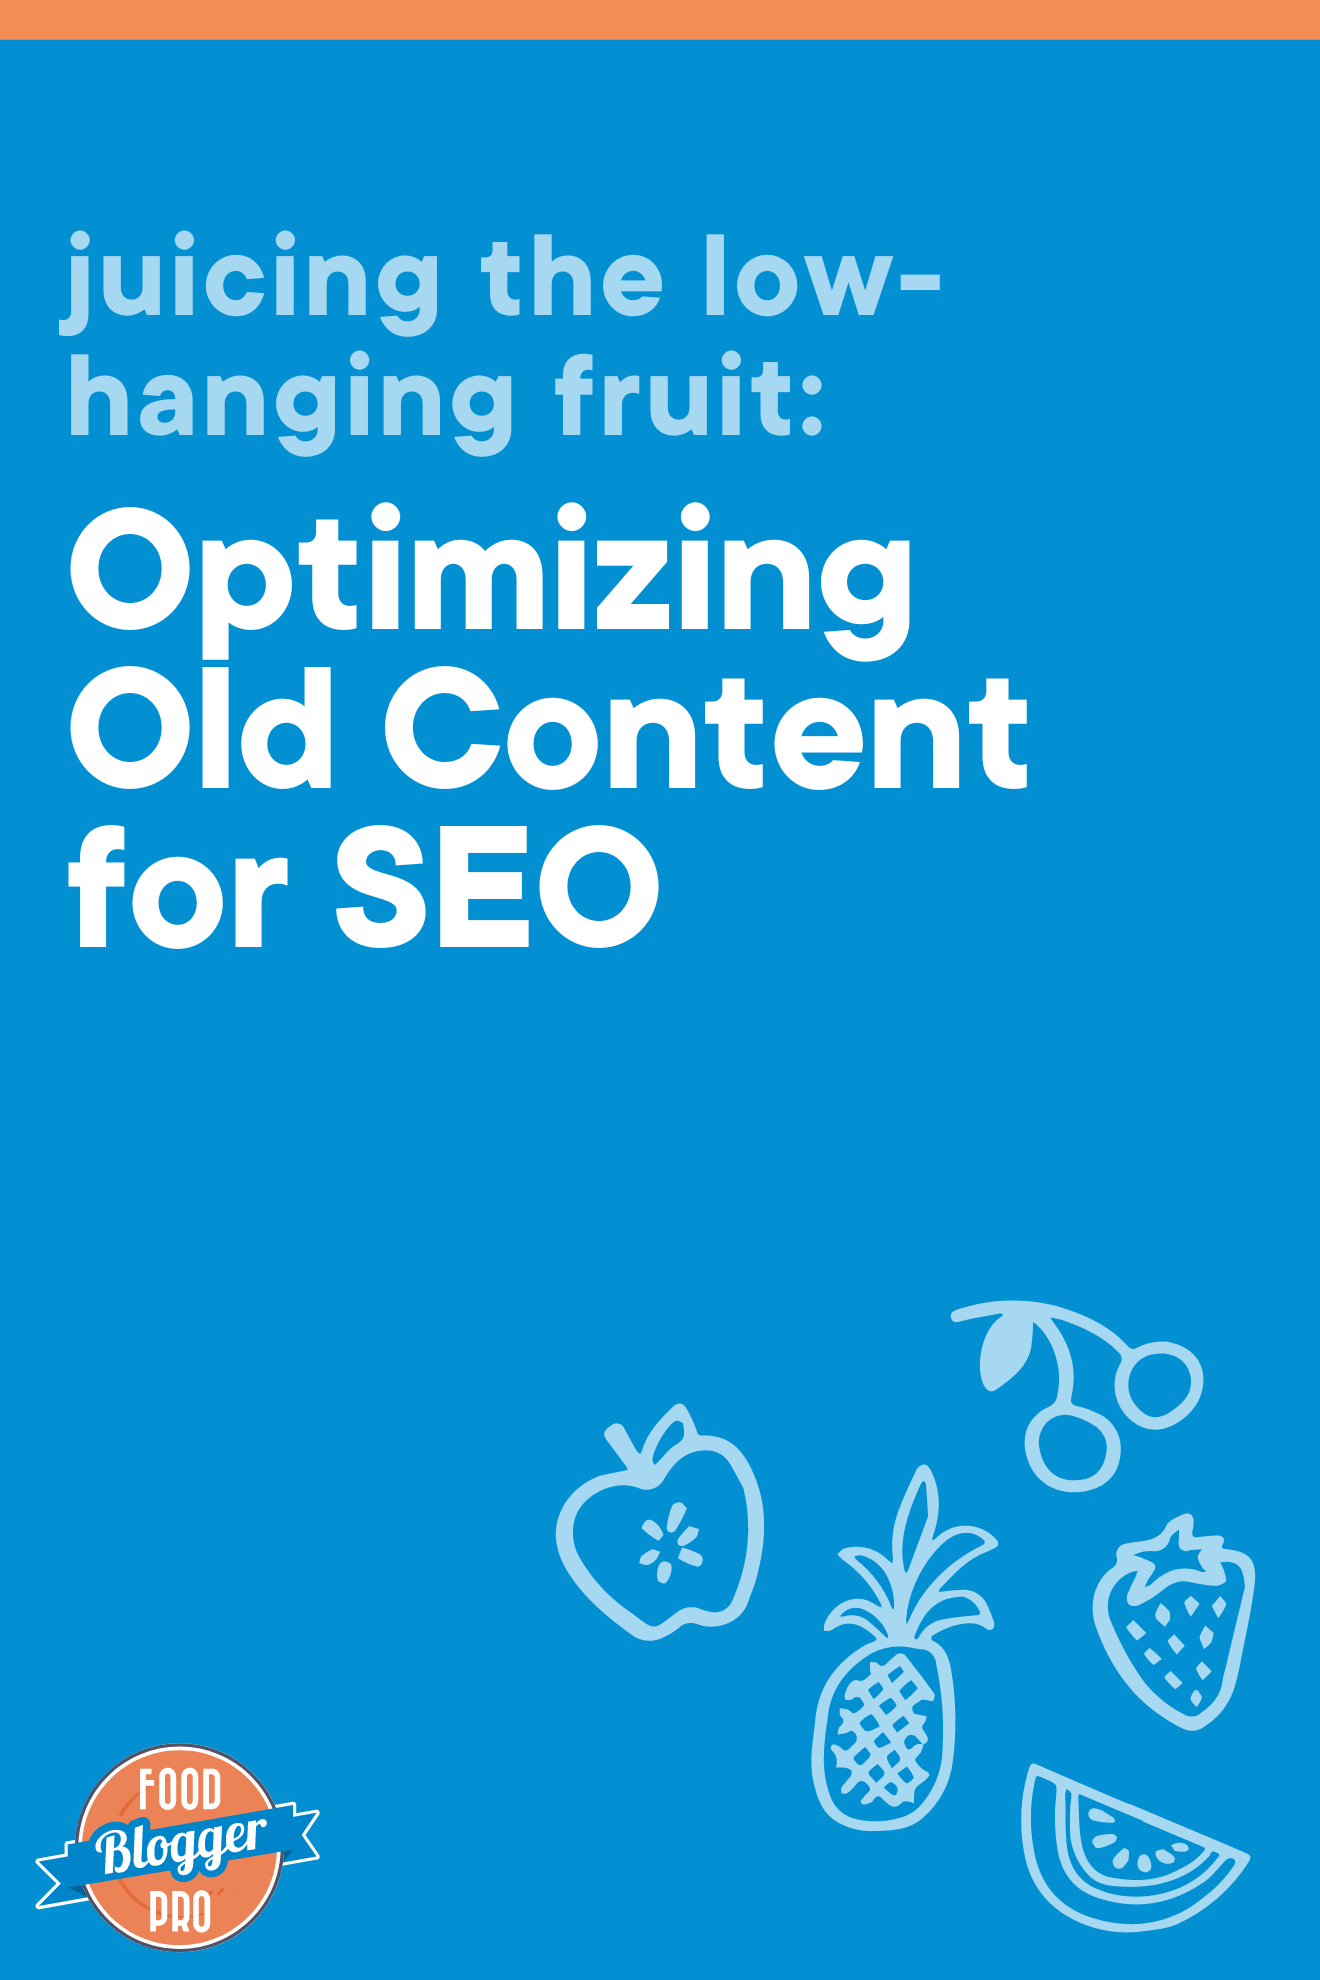 The title of this article, 'Juicing the Low-Hanging Fruit: Optimizing Old Content for SEO' on a blue background with fruit icons and the Food Blogger Pro logo